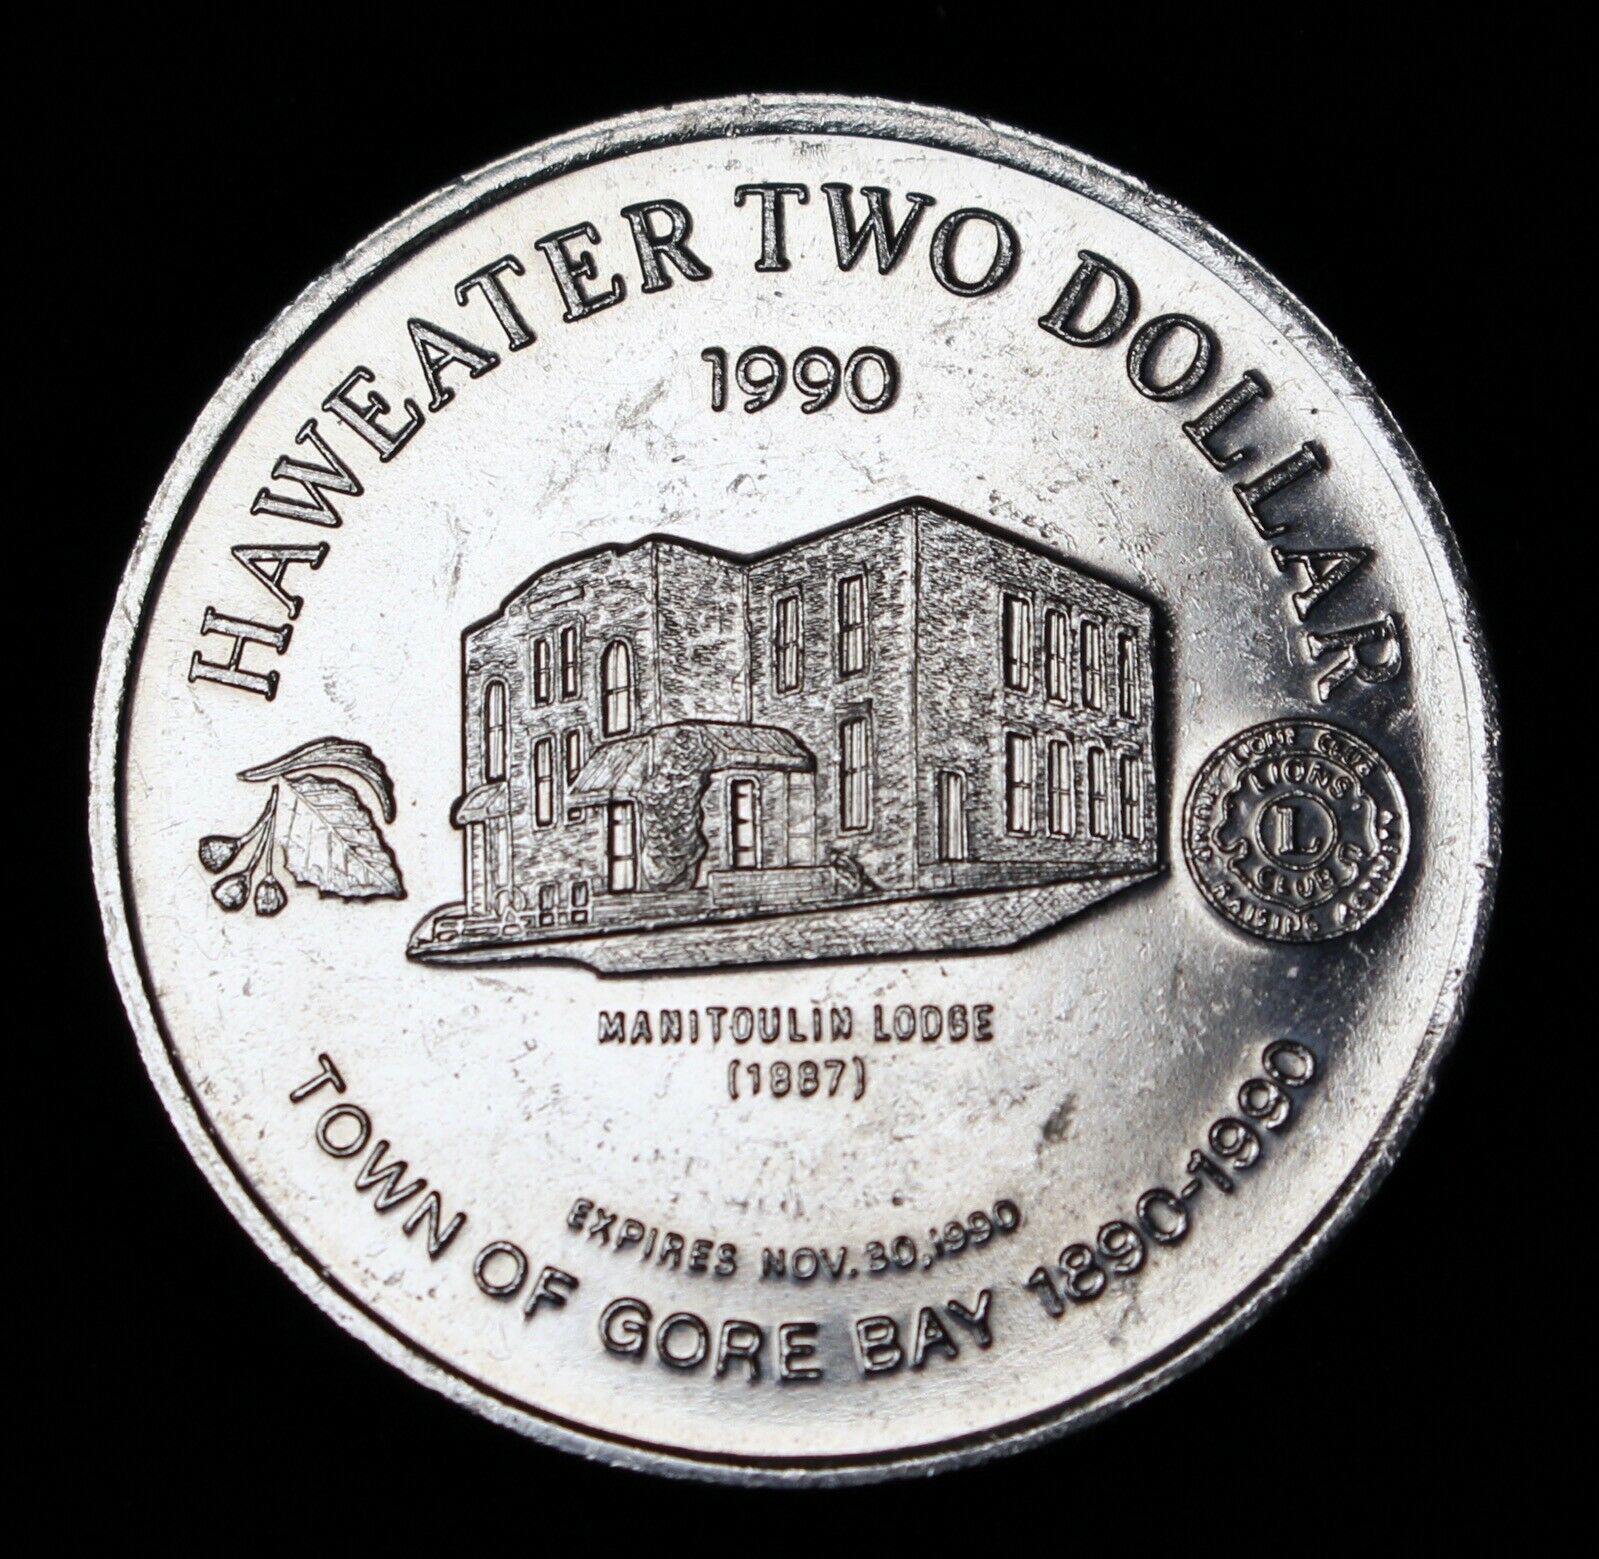 1990 MANITOULIN ISLANDS 2 TWO DOLLAR - GORE BAY - NICE